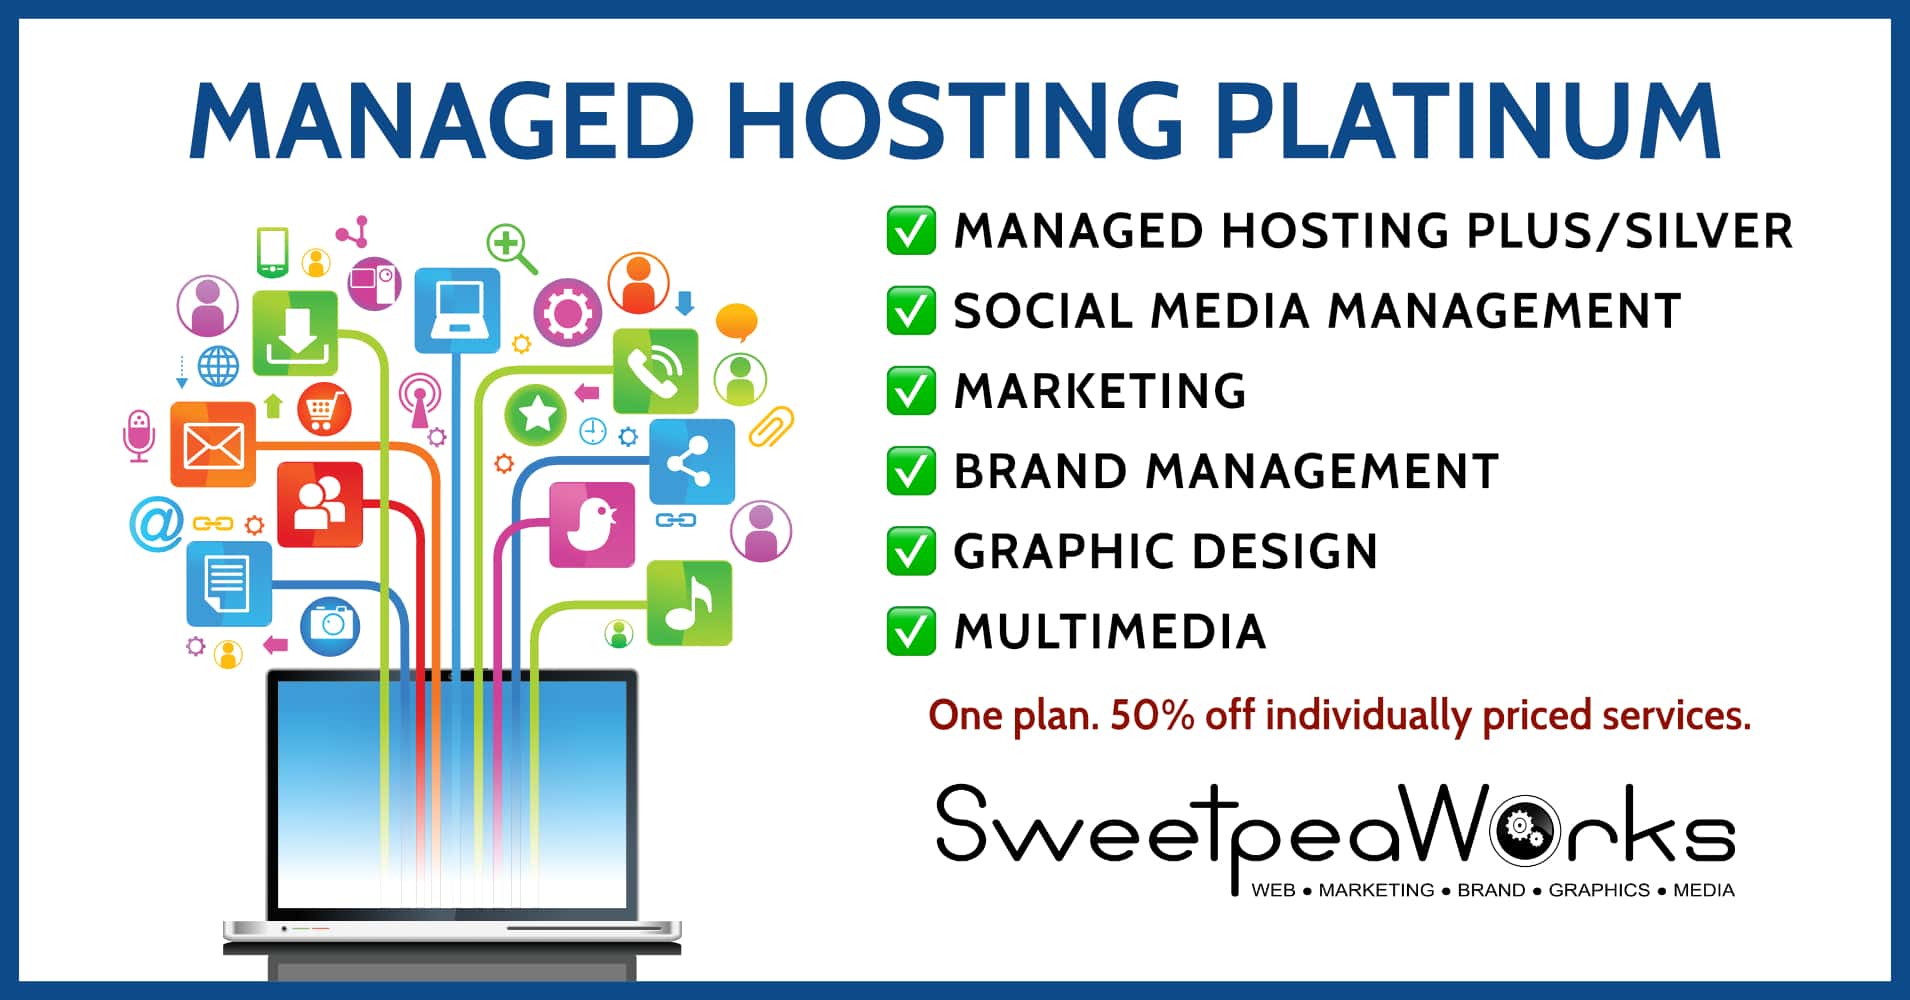 Promotional graphic for a platinum managed hosting service, highlighting included features and offering a 50% discount on individual services.